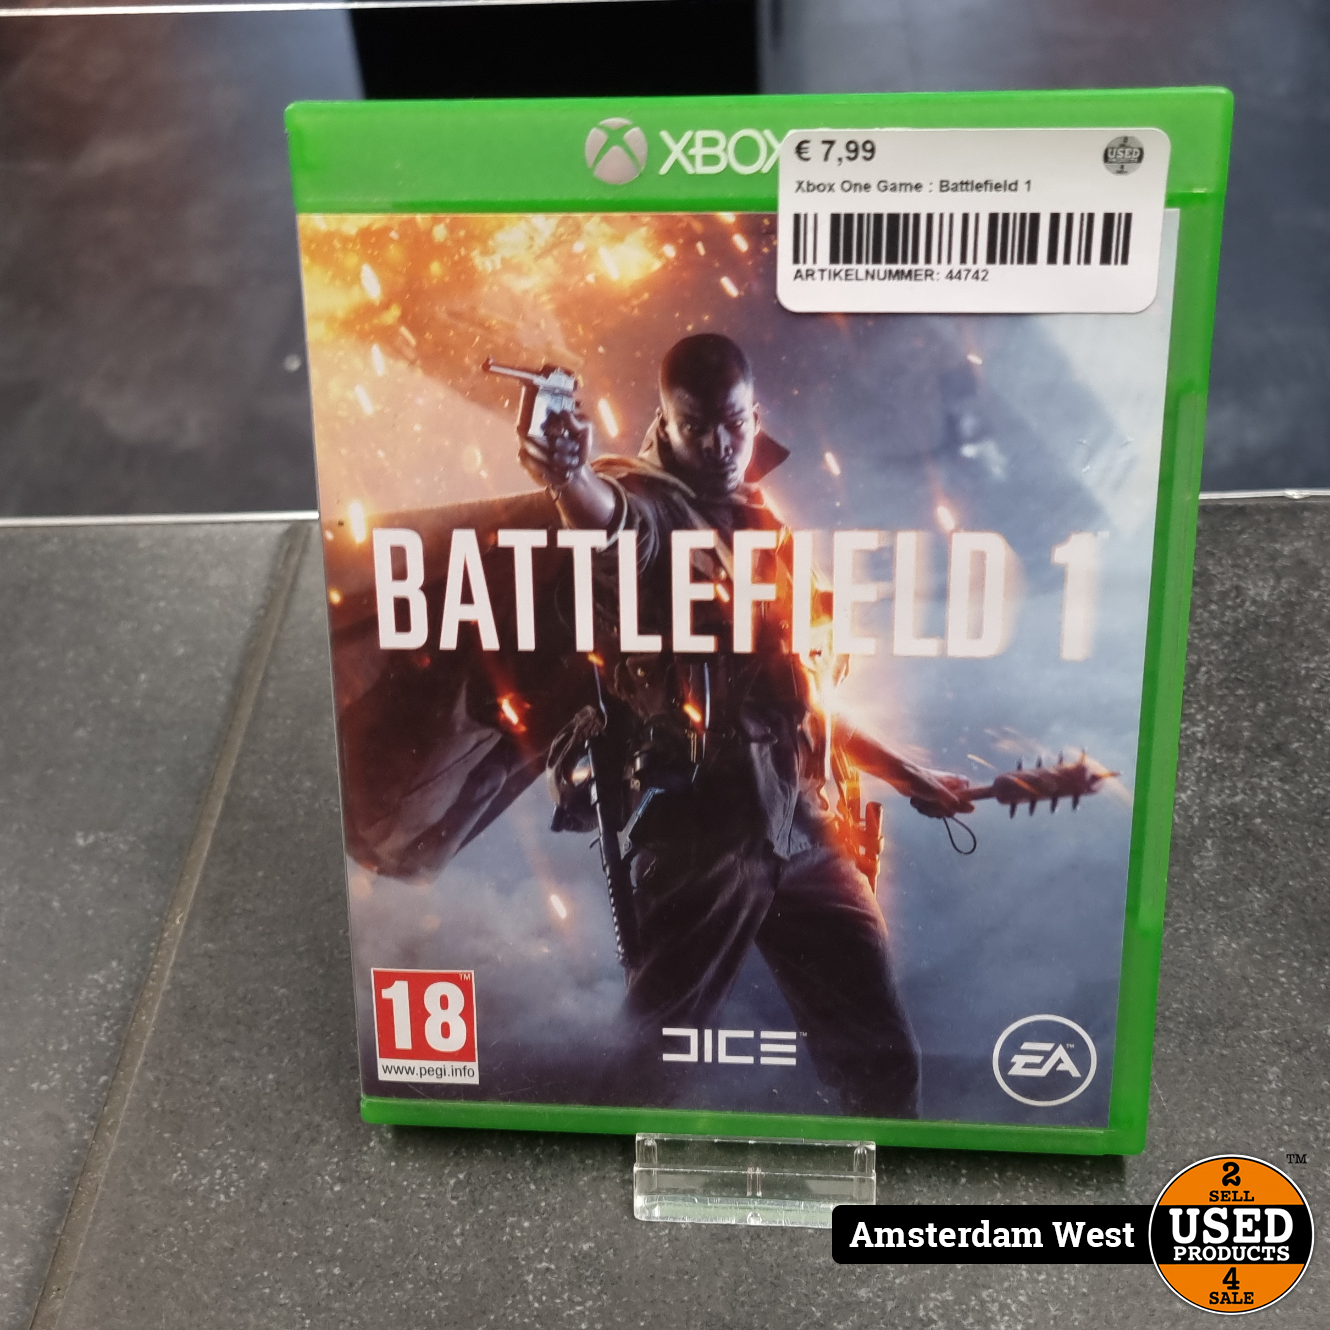 Xbox One Game : Battlefield 1 - Used Products Amsterdam West